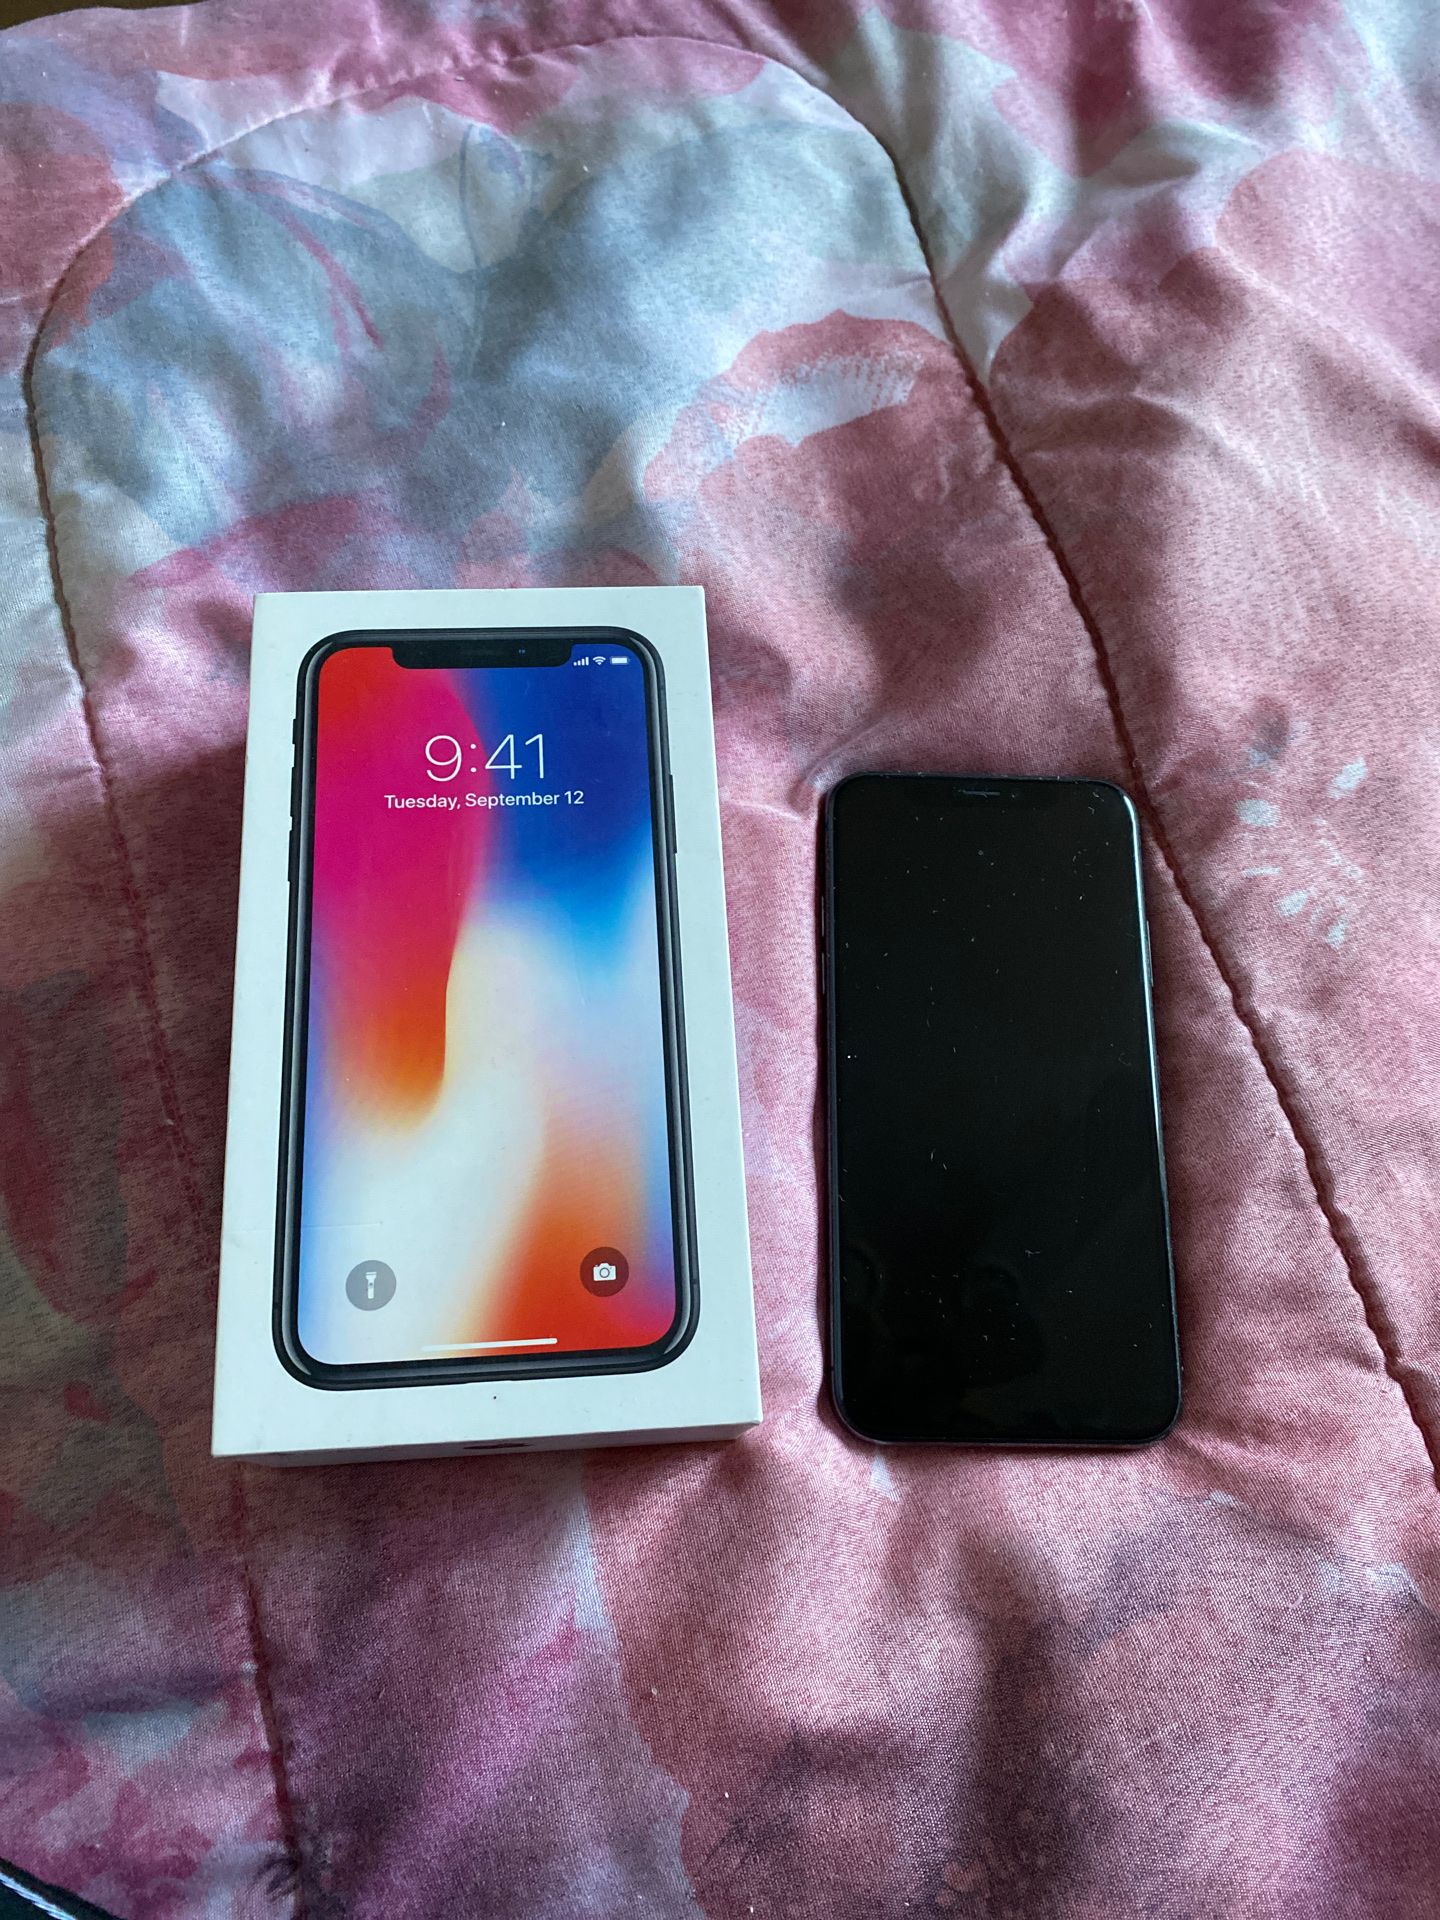 iPhone X with box